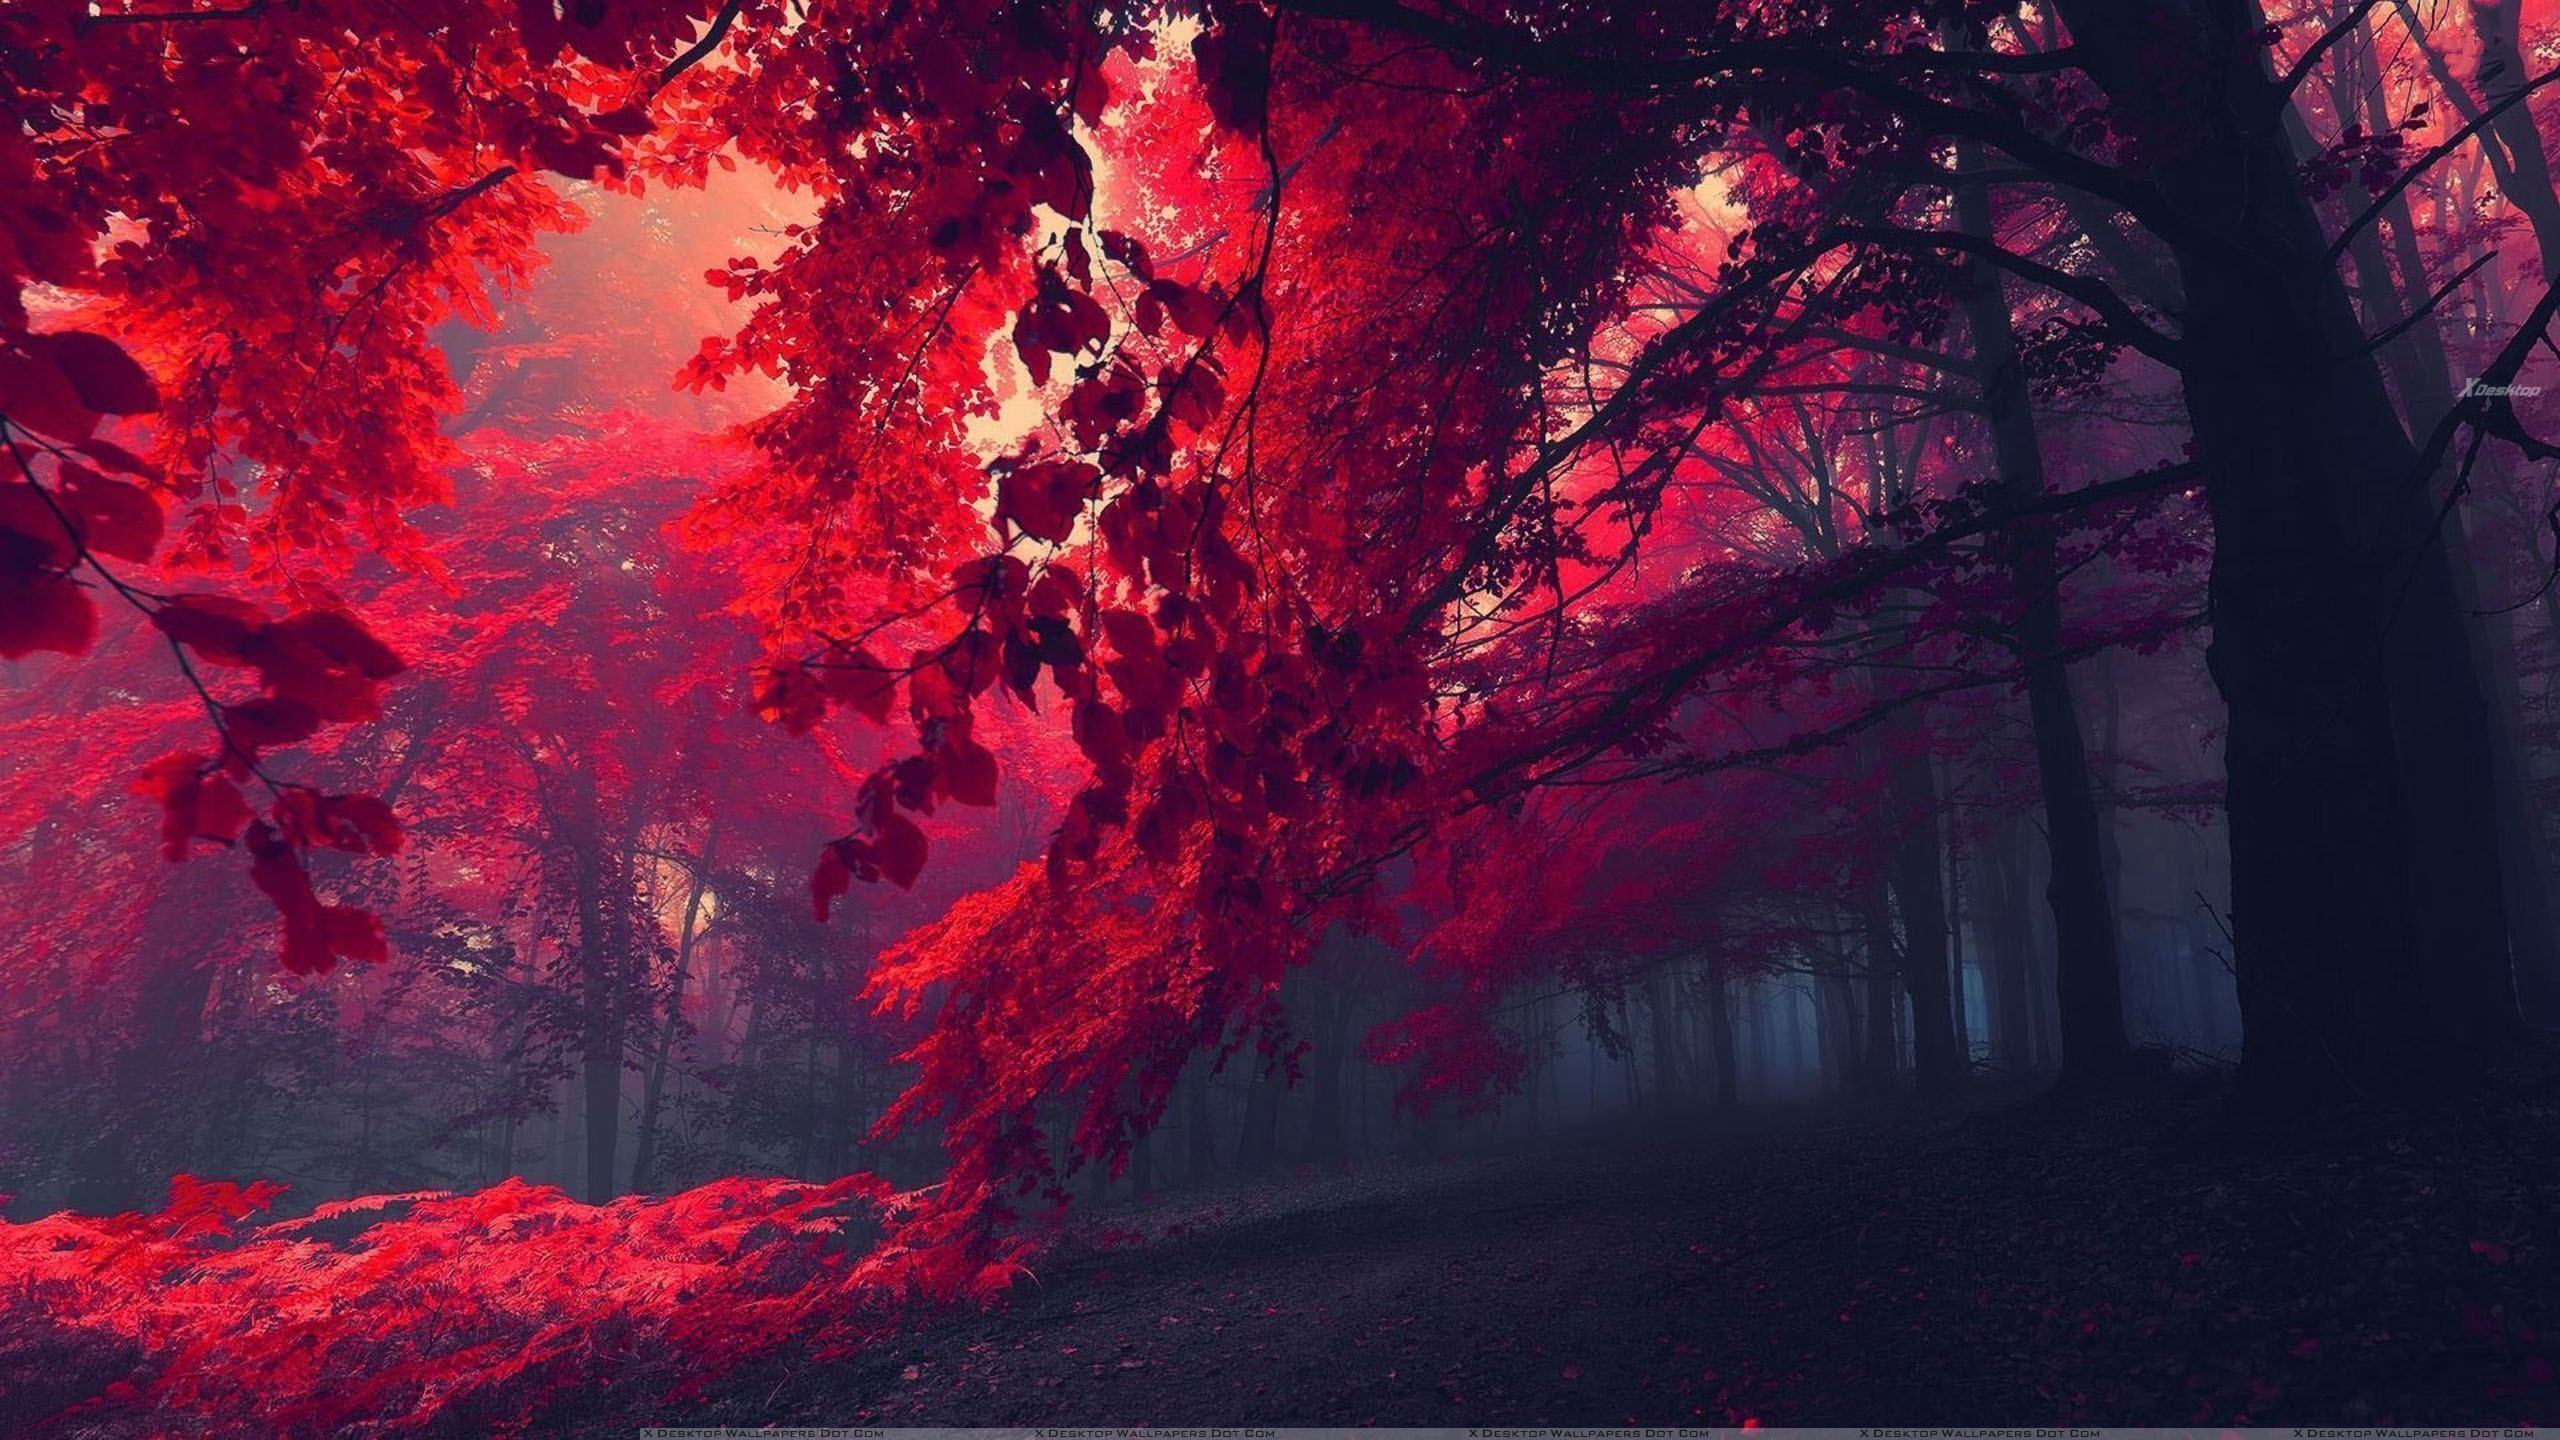 Who Wants To Walk In This Beautiful Red Forest? Wallpaper